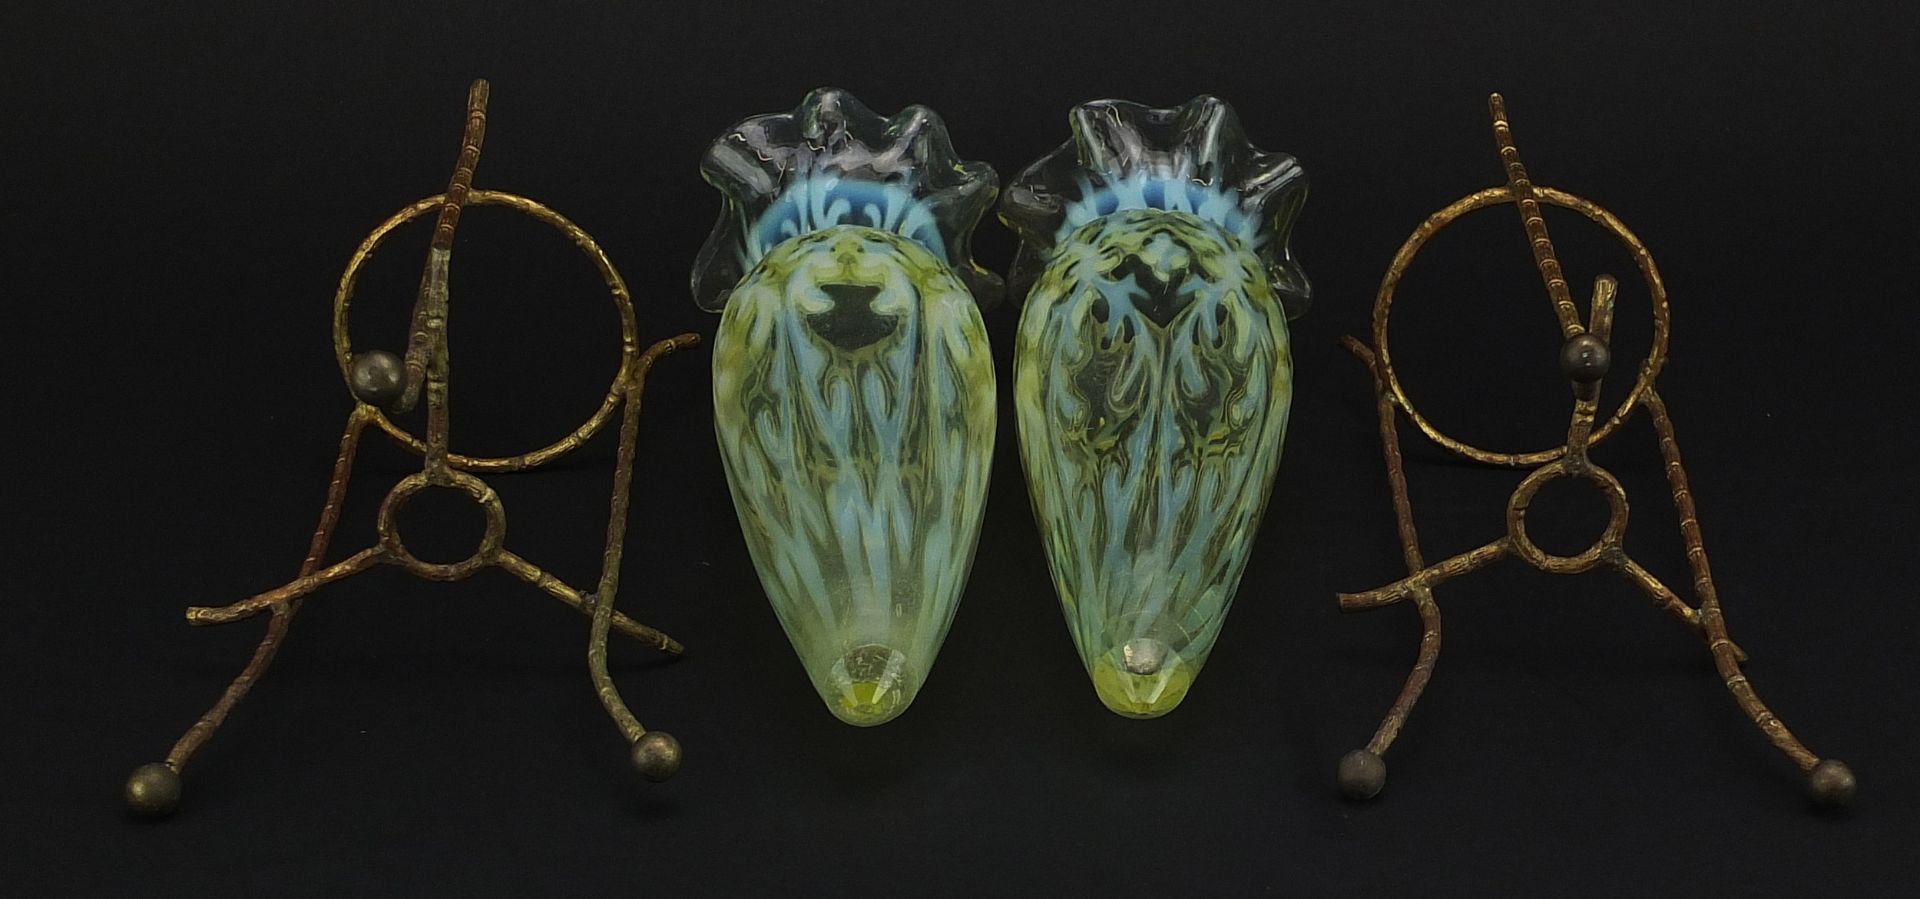 Attributed to James Powell & Sons, pair of Arts & Crafts Vaseline glass vases housed in gilt metal - Image 3 of 6